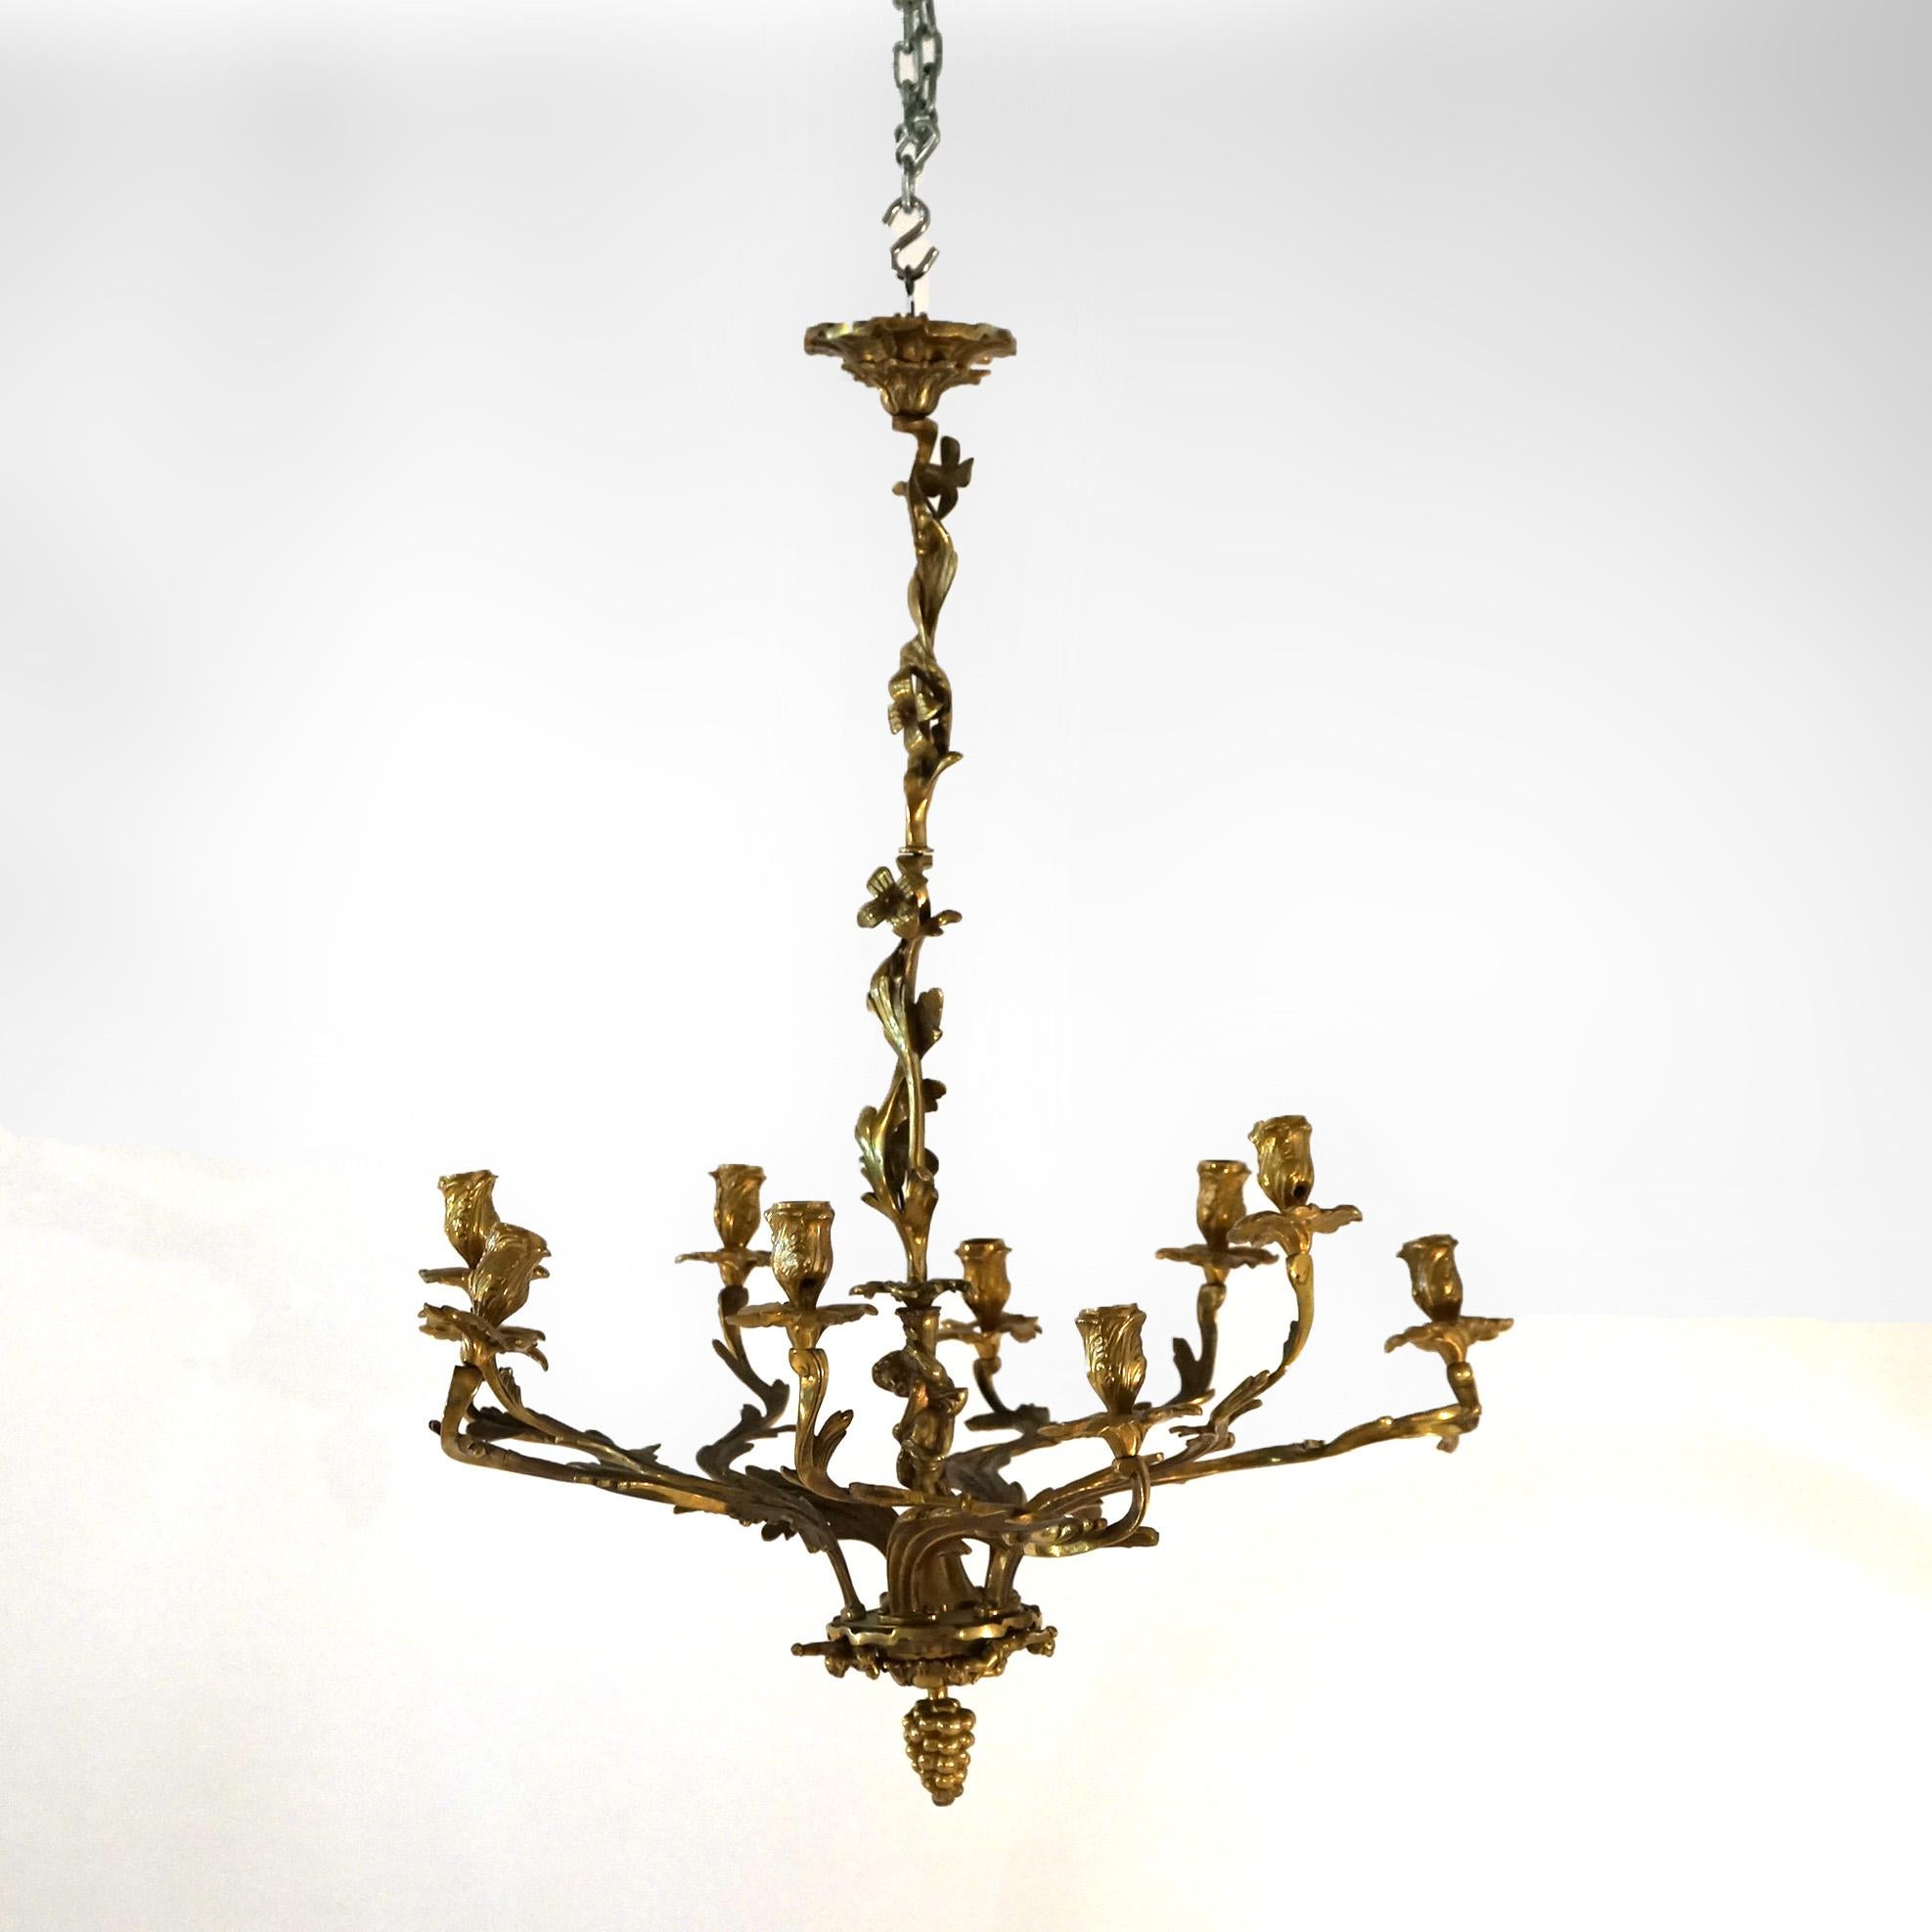 An antique French Louis XIV style hanging candelabra (chandelier) offers gilt cast bronze construction with center column having cherub, grape form drop finial and ten scroll form foliate arms terminating in candle sockets, c1880

Measures - 34.5